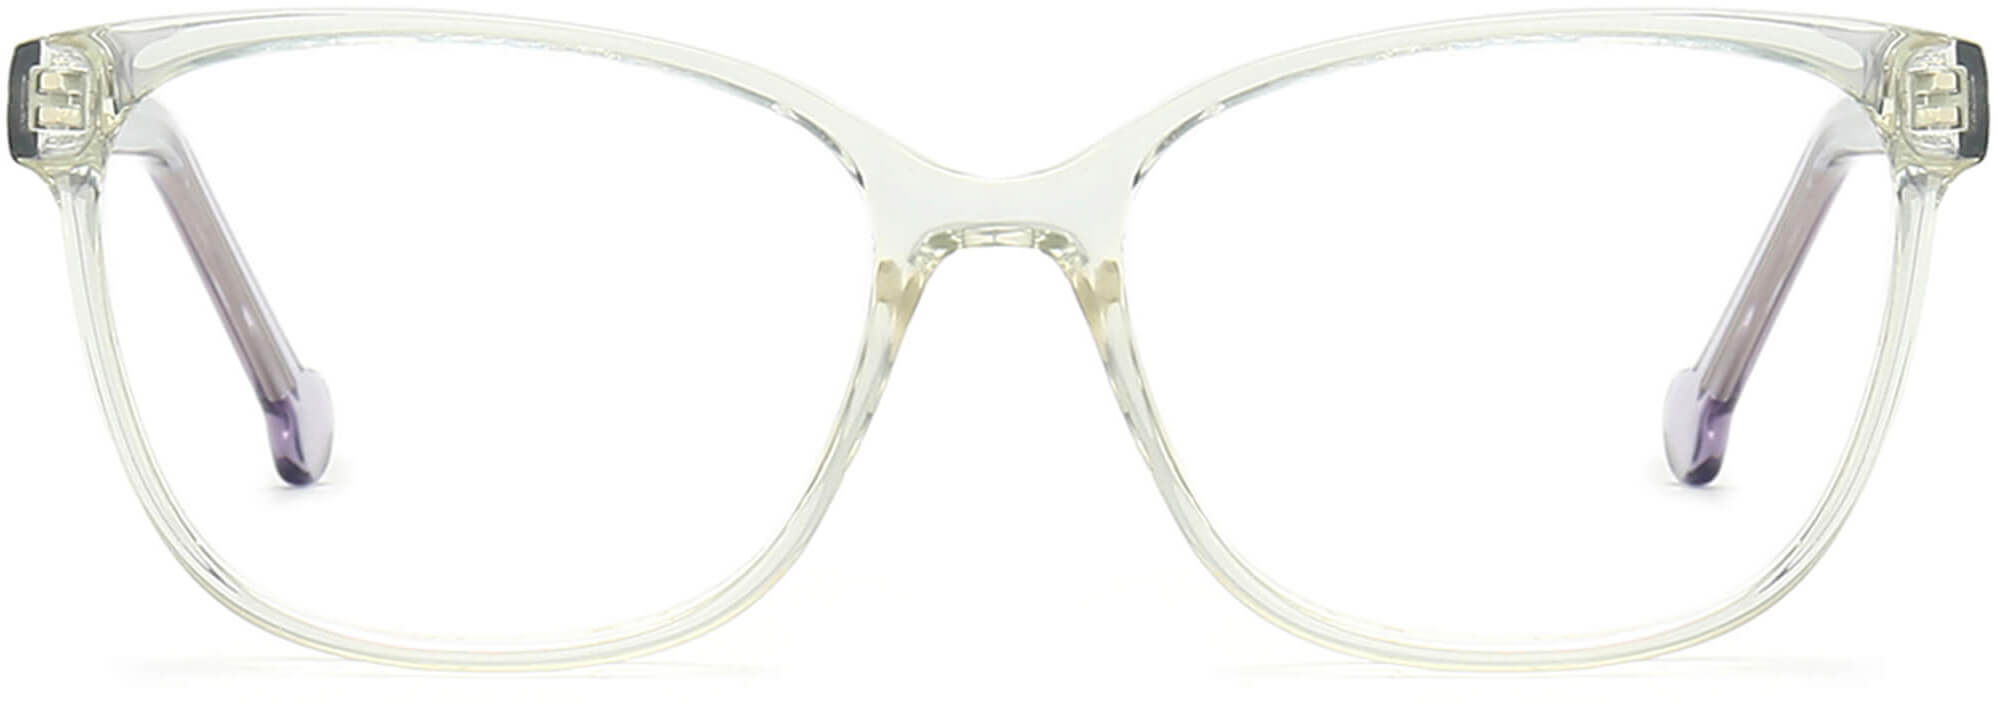 Legacy Cateye Clear Eyeglasses from ANRRI, front view